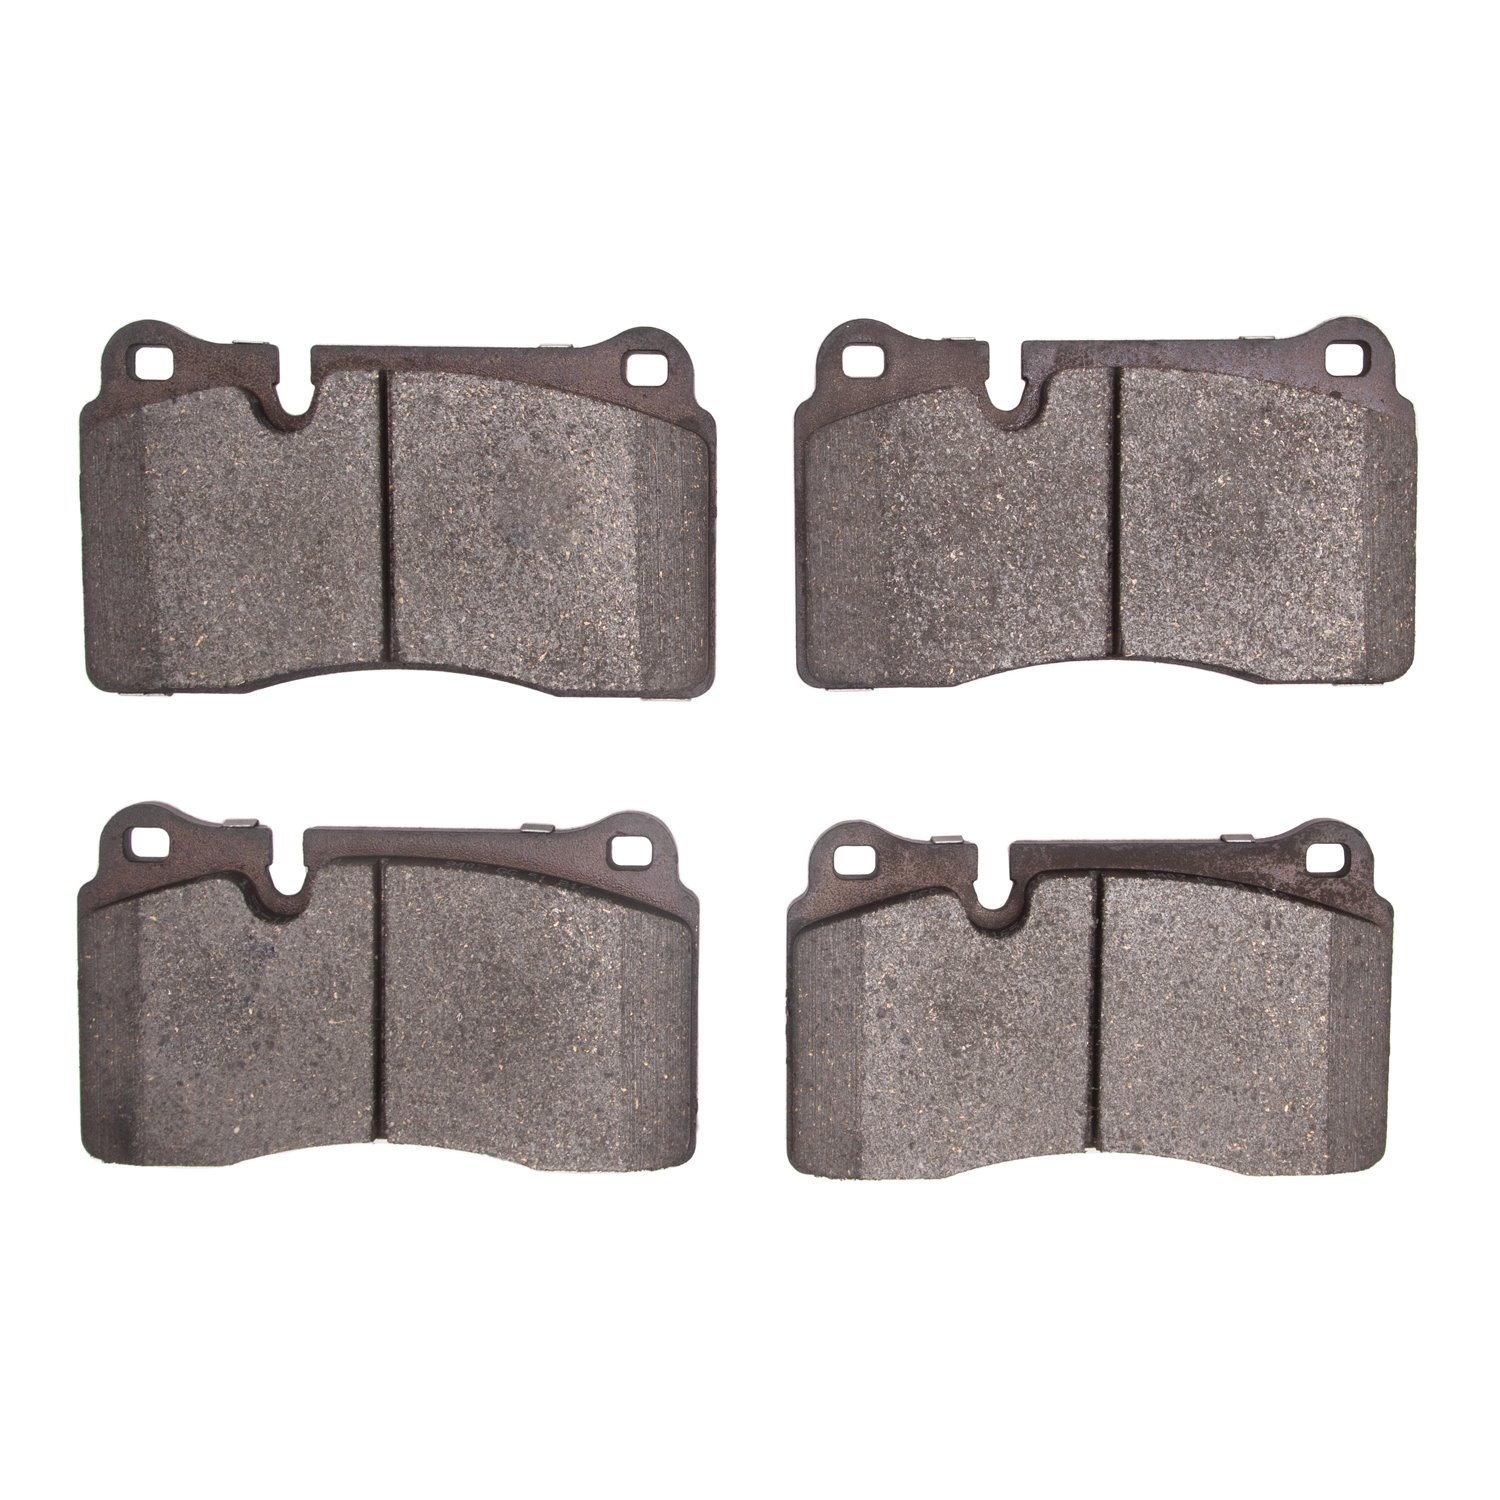 1551-1165-10 5000 Advanced Low-Metallic Brake Pads, 2005-2012 Multiple Makes/Models, Position: Front